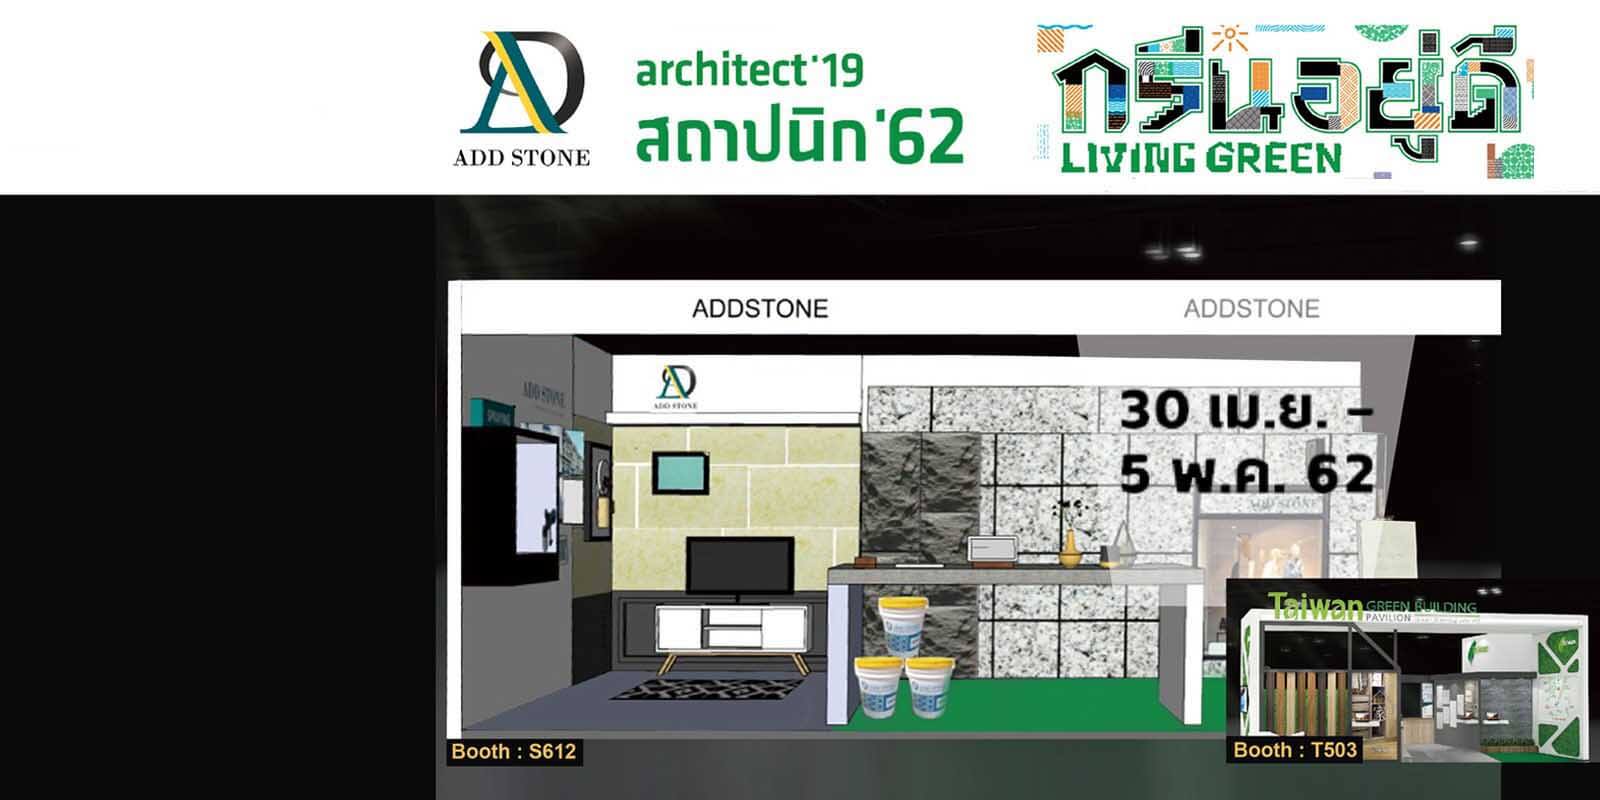 ADD STONE participates in Architect '19 Thailand International Building Materials Exhibition, booth at S612 & T503